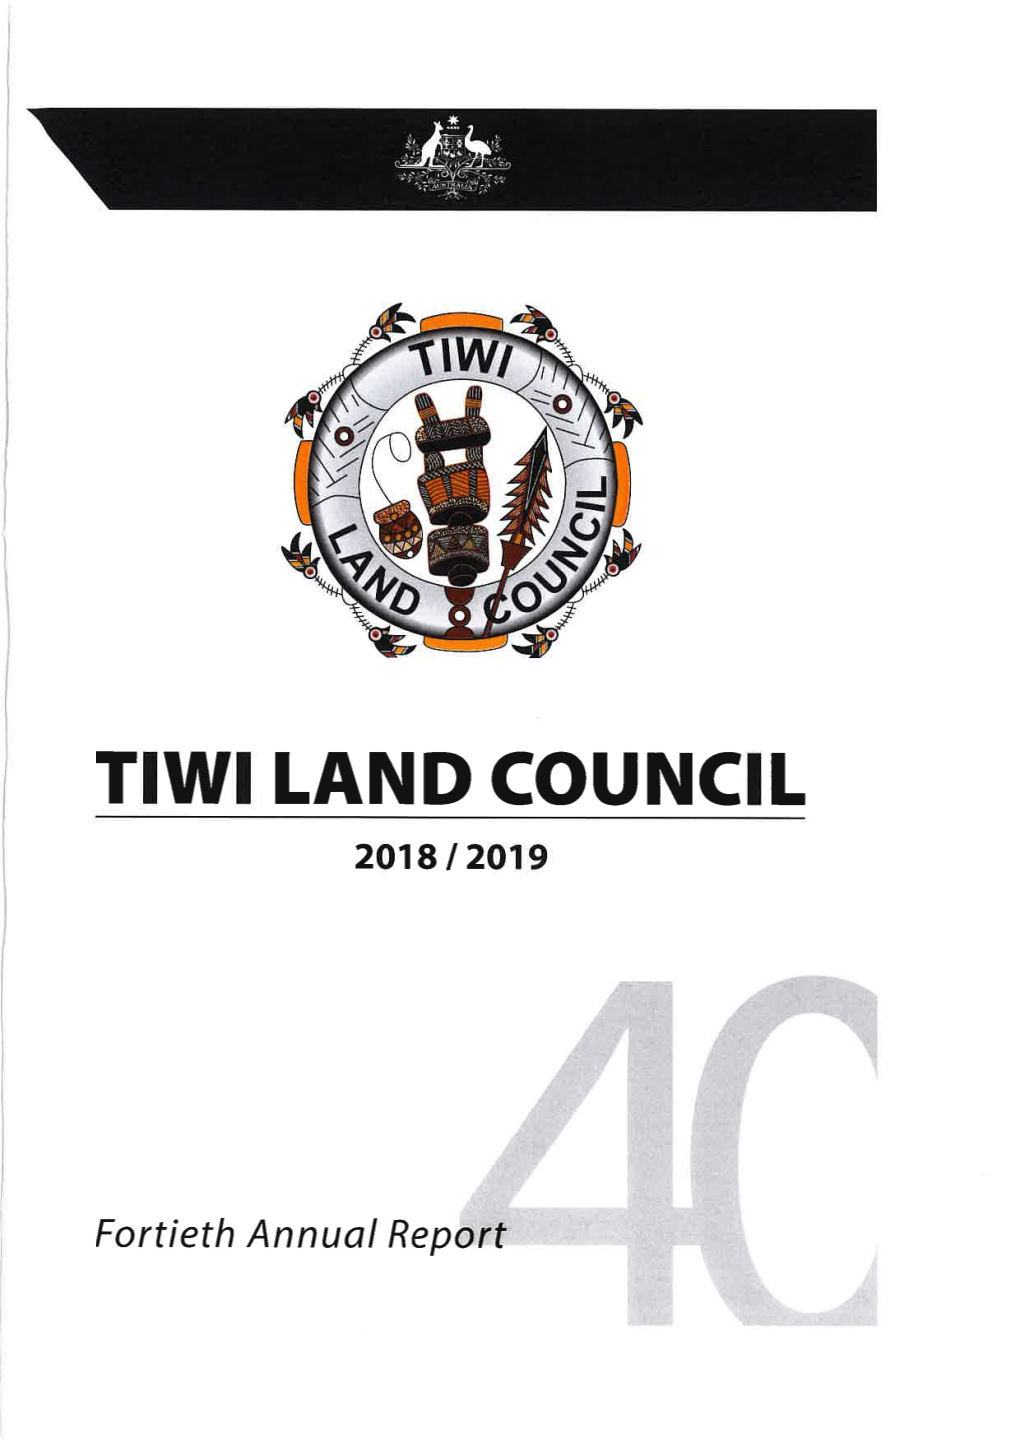 Annual Report for 2018/2019